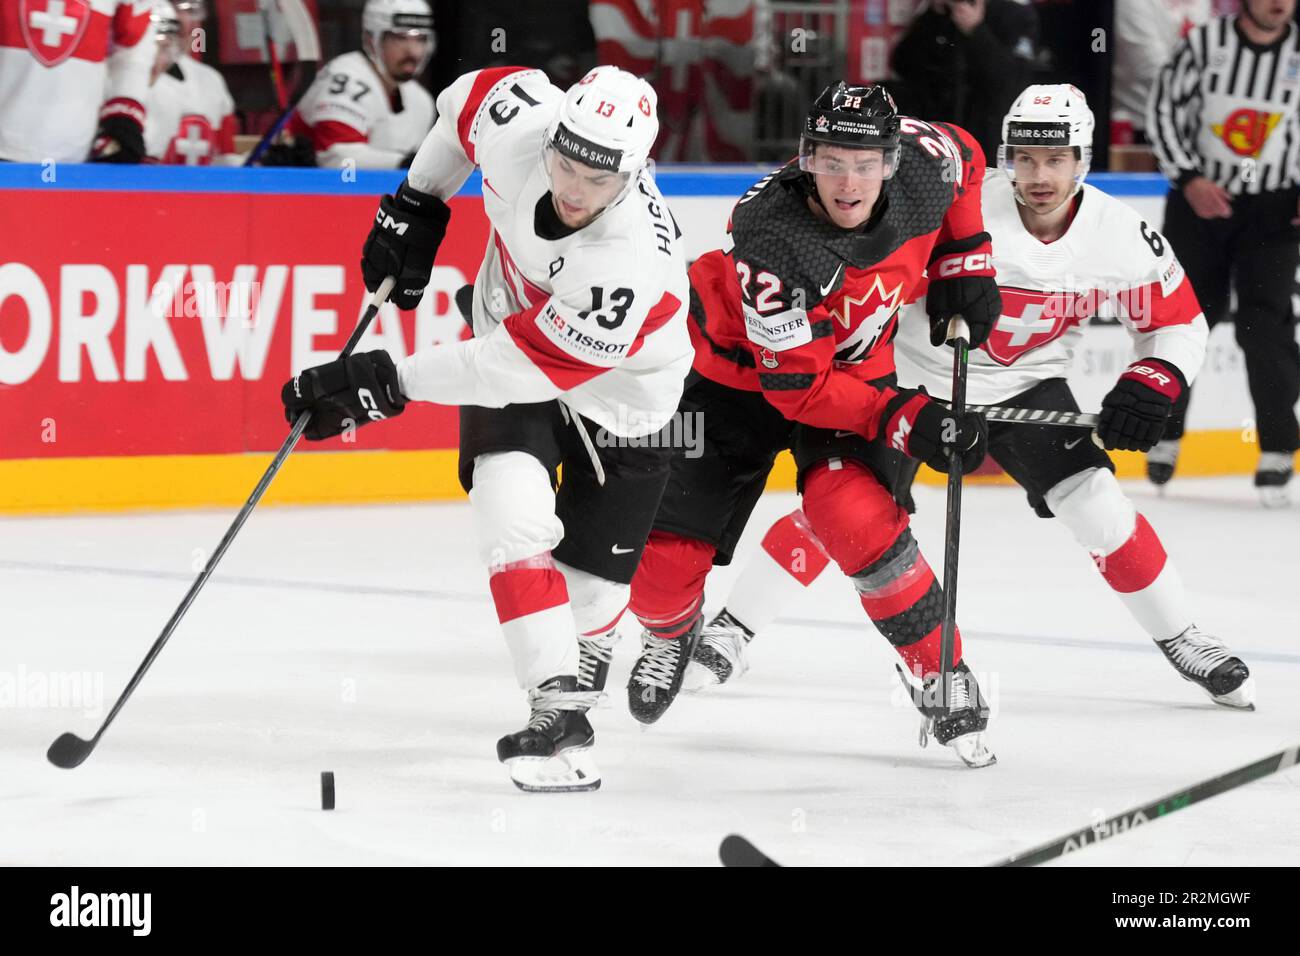 Nico Hischier of Switzerland, left, fights for a puck with goalie Samuel  Montembeault of Canada during the group B match between Switzerland and  Canada at the ice hockey world championship in Riga